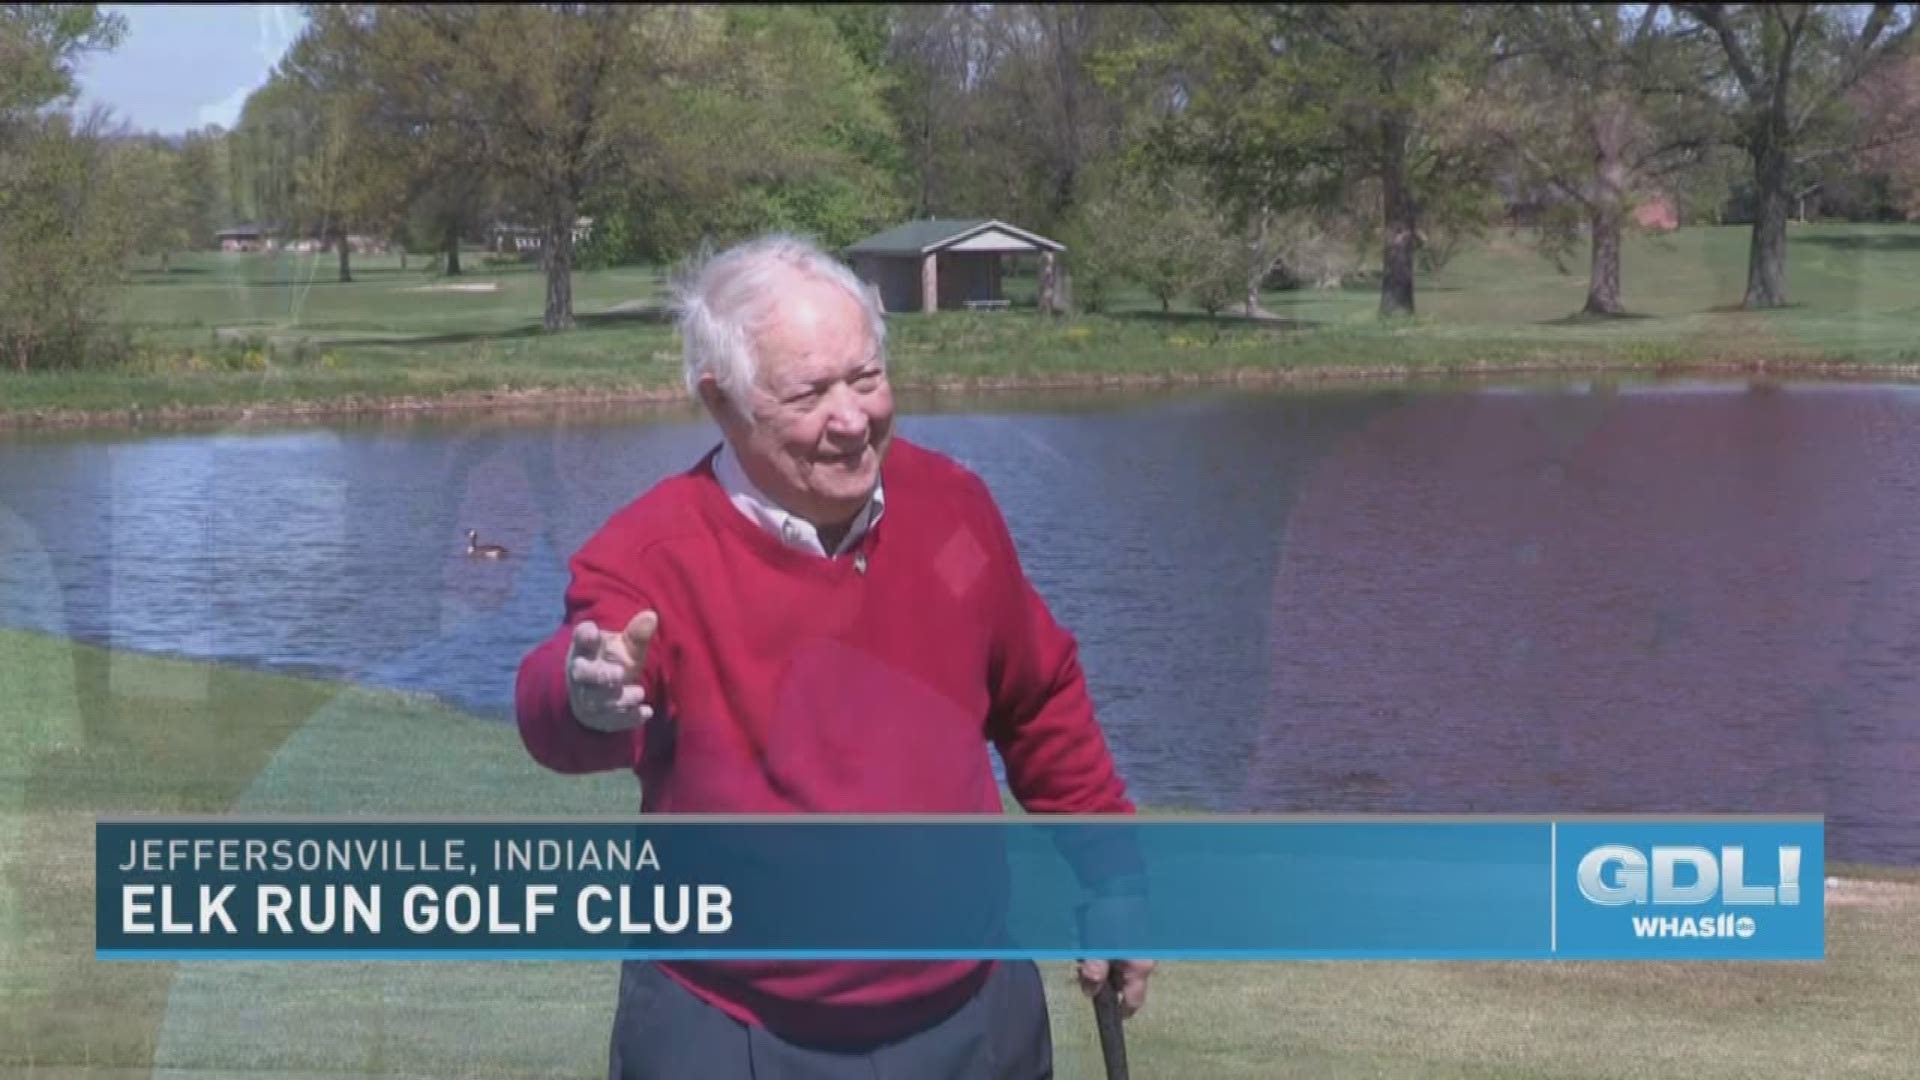 The Fifth Annual Ted Throckmorton Crusade Golf Tournament is being held Sunday, May 20, 2018 at Elk Run Golf Club in Jeffersonville, IN, with proceeds benefiting the WHAS Crusade for Children. Ted volunteered for the annual telethon for 62 years, and his